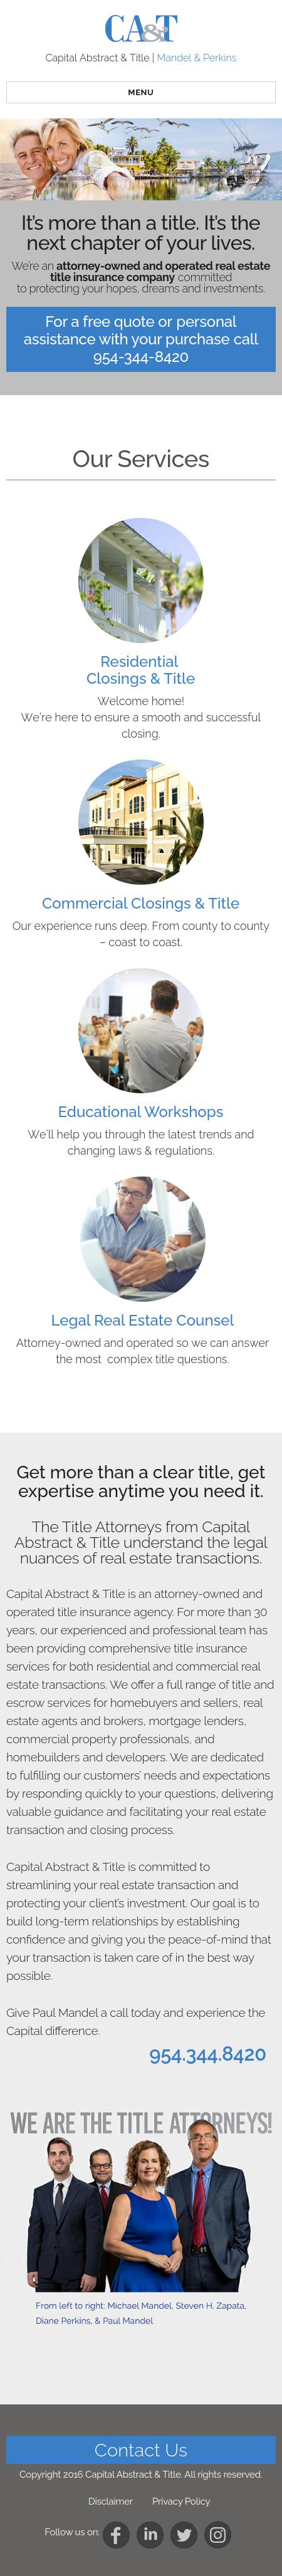 Capital Abstract and Title - Coral Springs FL Lawyers